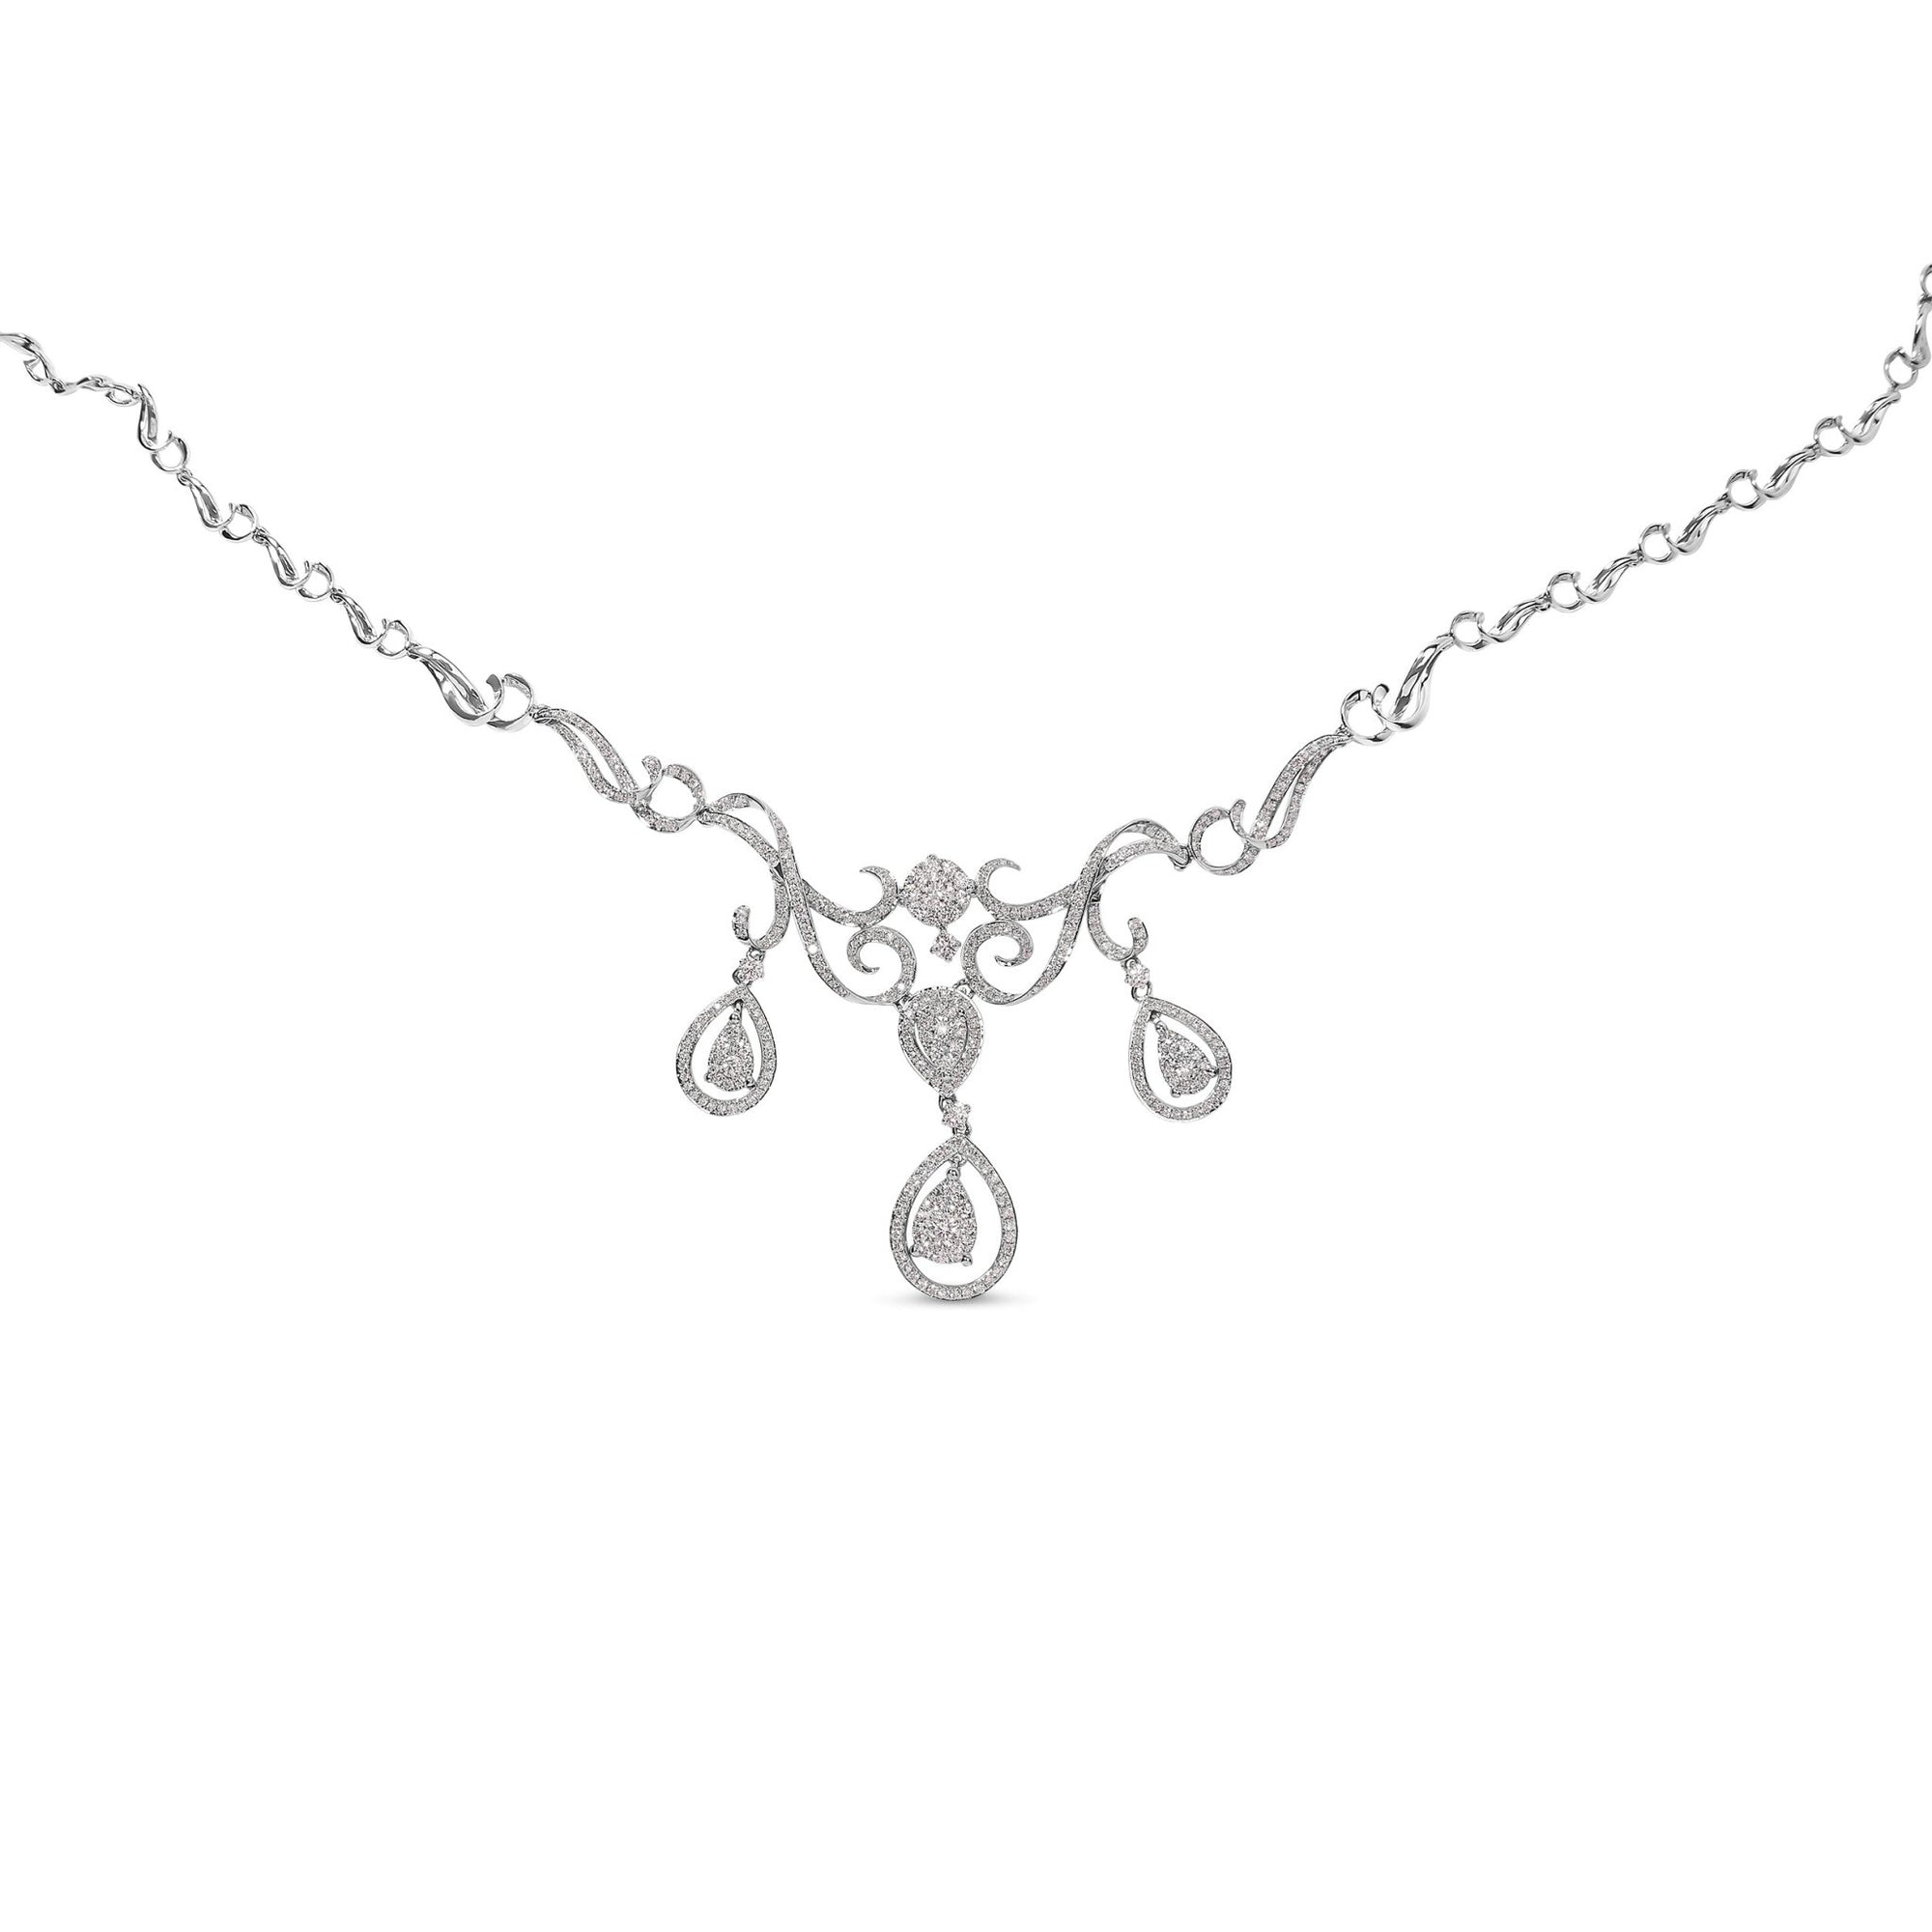 14K White Gold 3 1/2 Cttw Diamond Statement Drop and Dangle Necklace (G-H Colors, SI1-SI2 Clarity) - LinkagejewelrydesignLinkagejewelrydesign